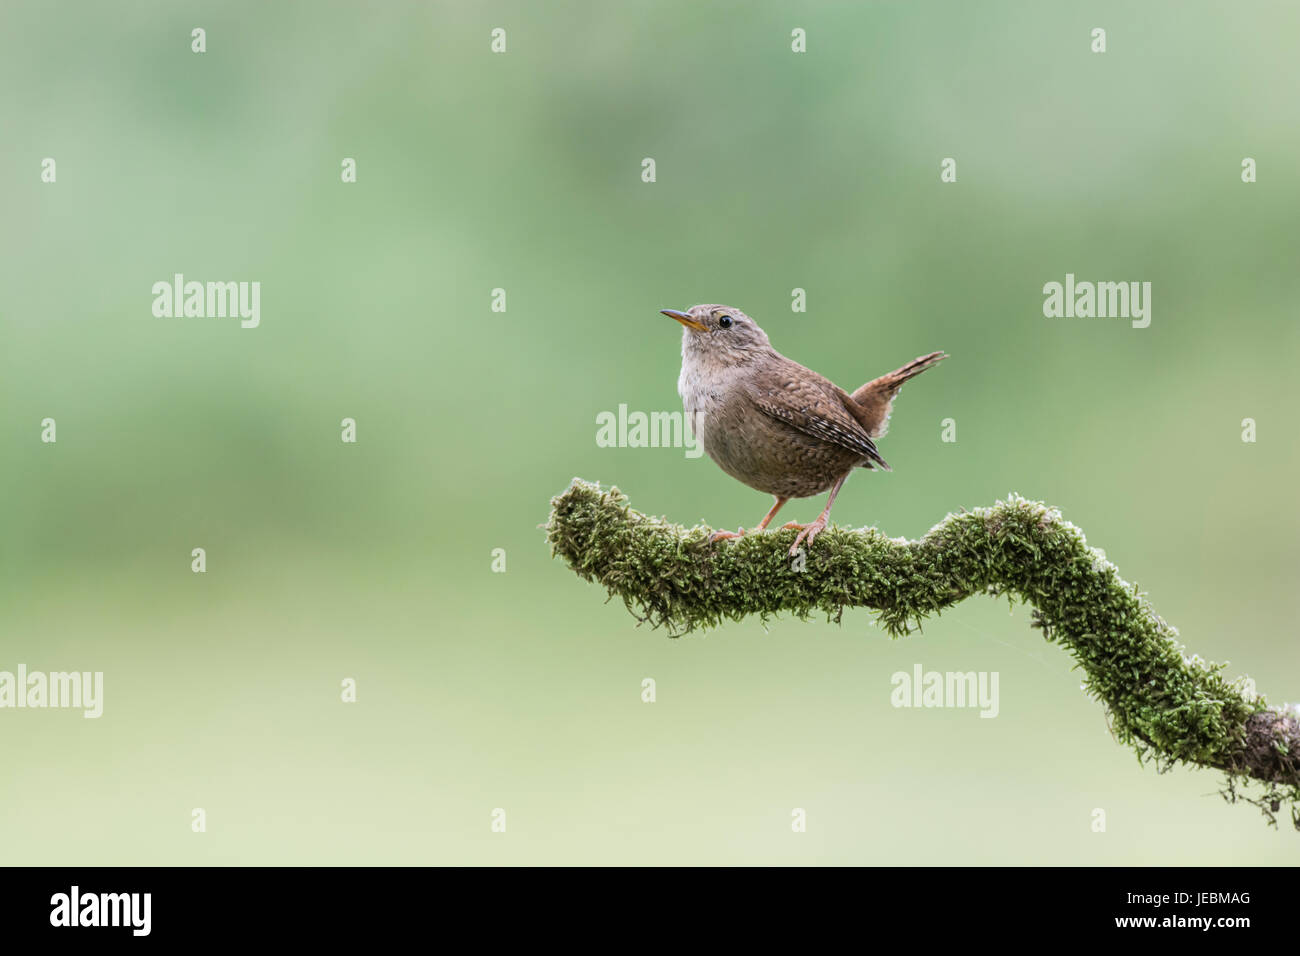 Wren (Troglodytes troglodytes) on an isolated branch. The species is called the winter wren in America, and the common or Holarctic wren elsewhere. Stock Photo